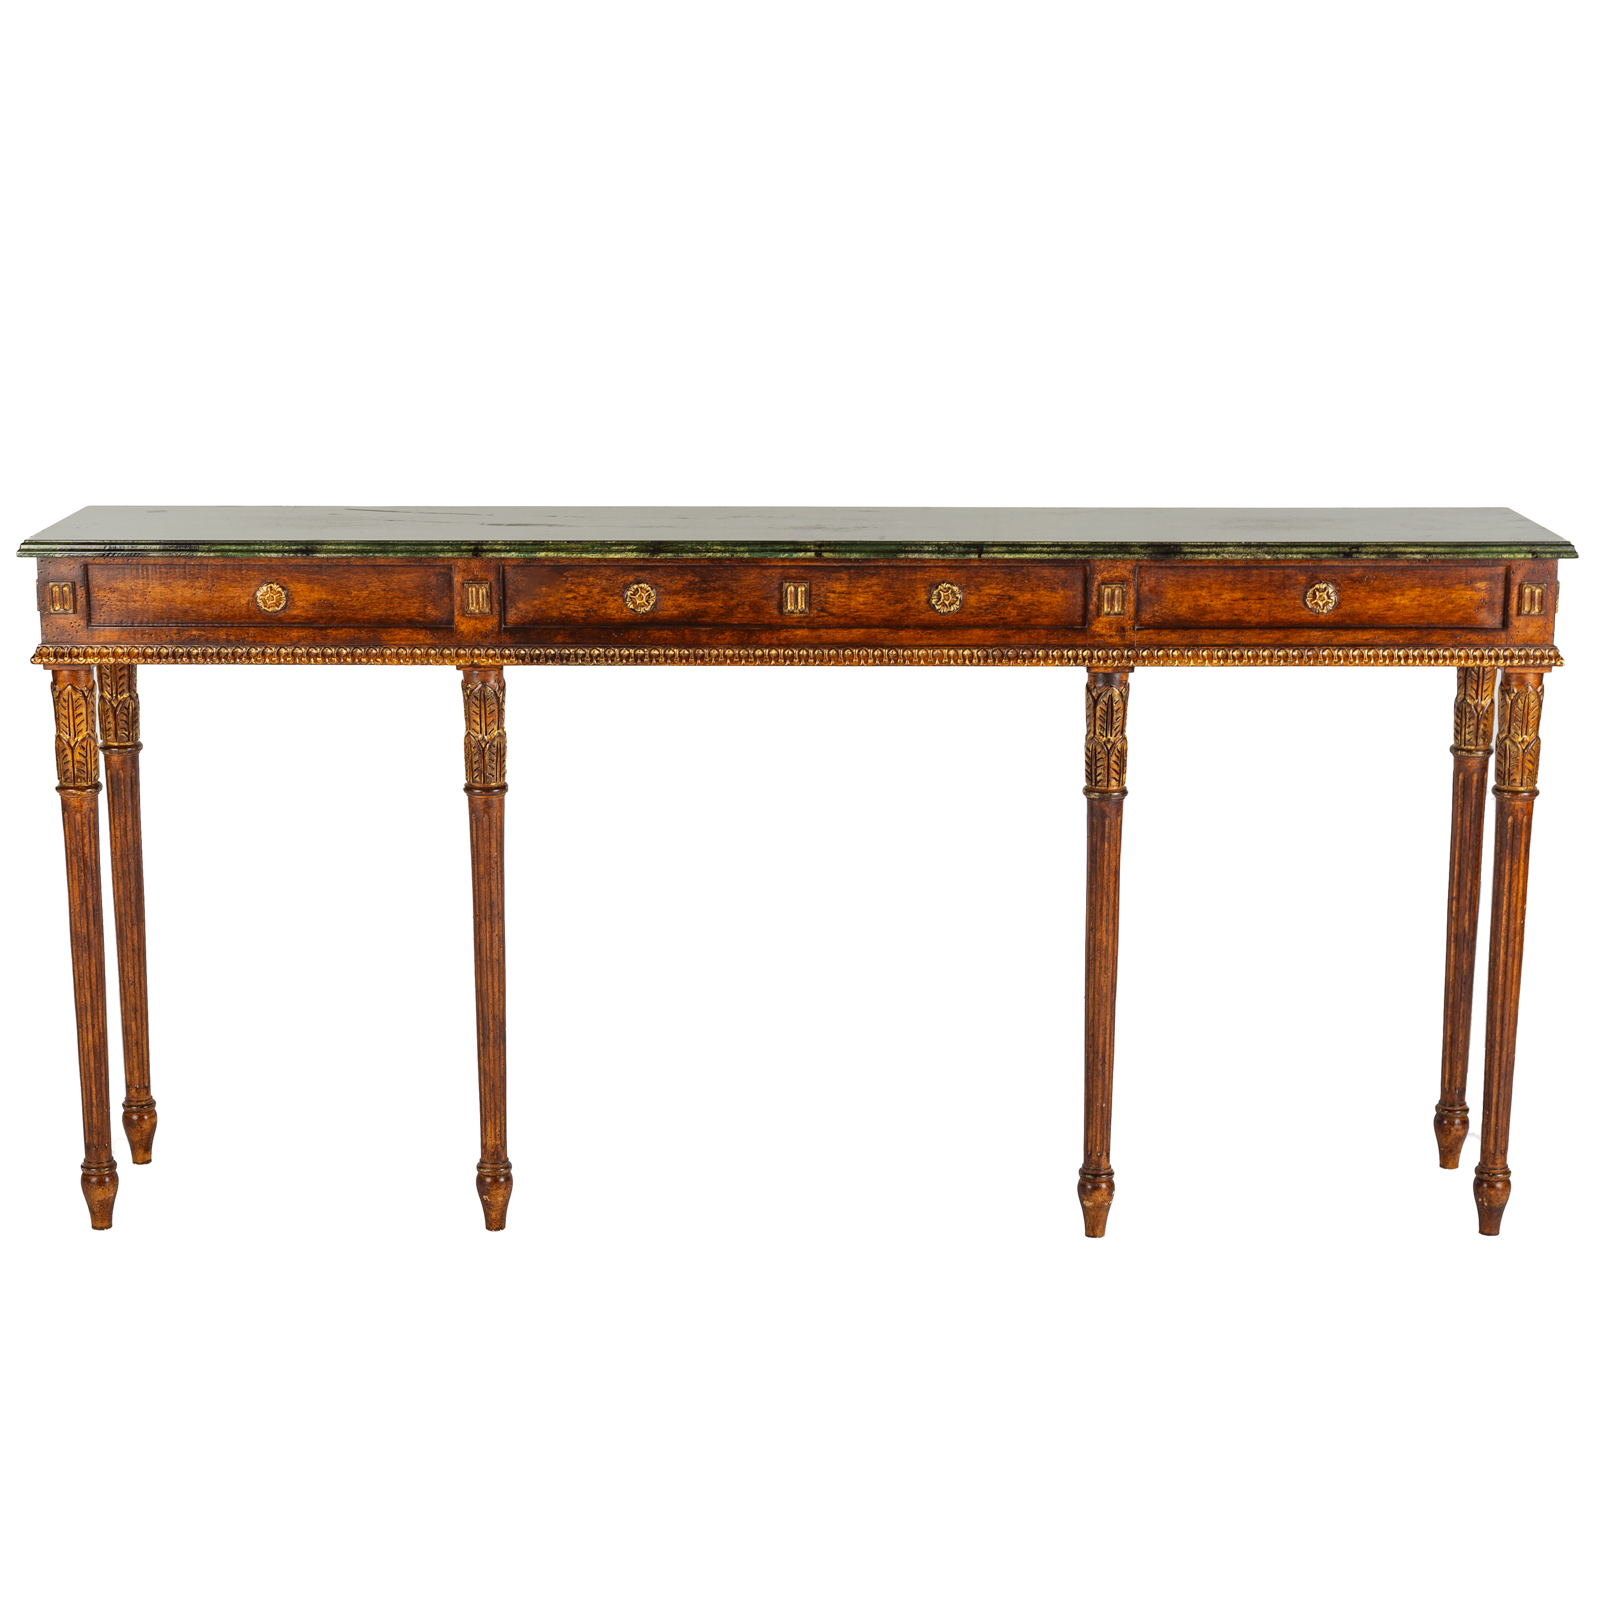 GEORGIAN STYLE PAINTED WOOD CONSOLE 3695a6